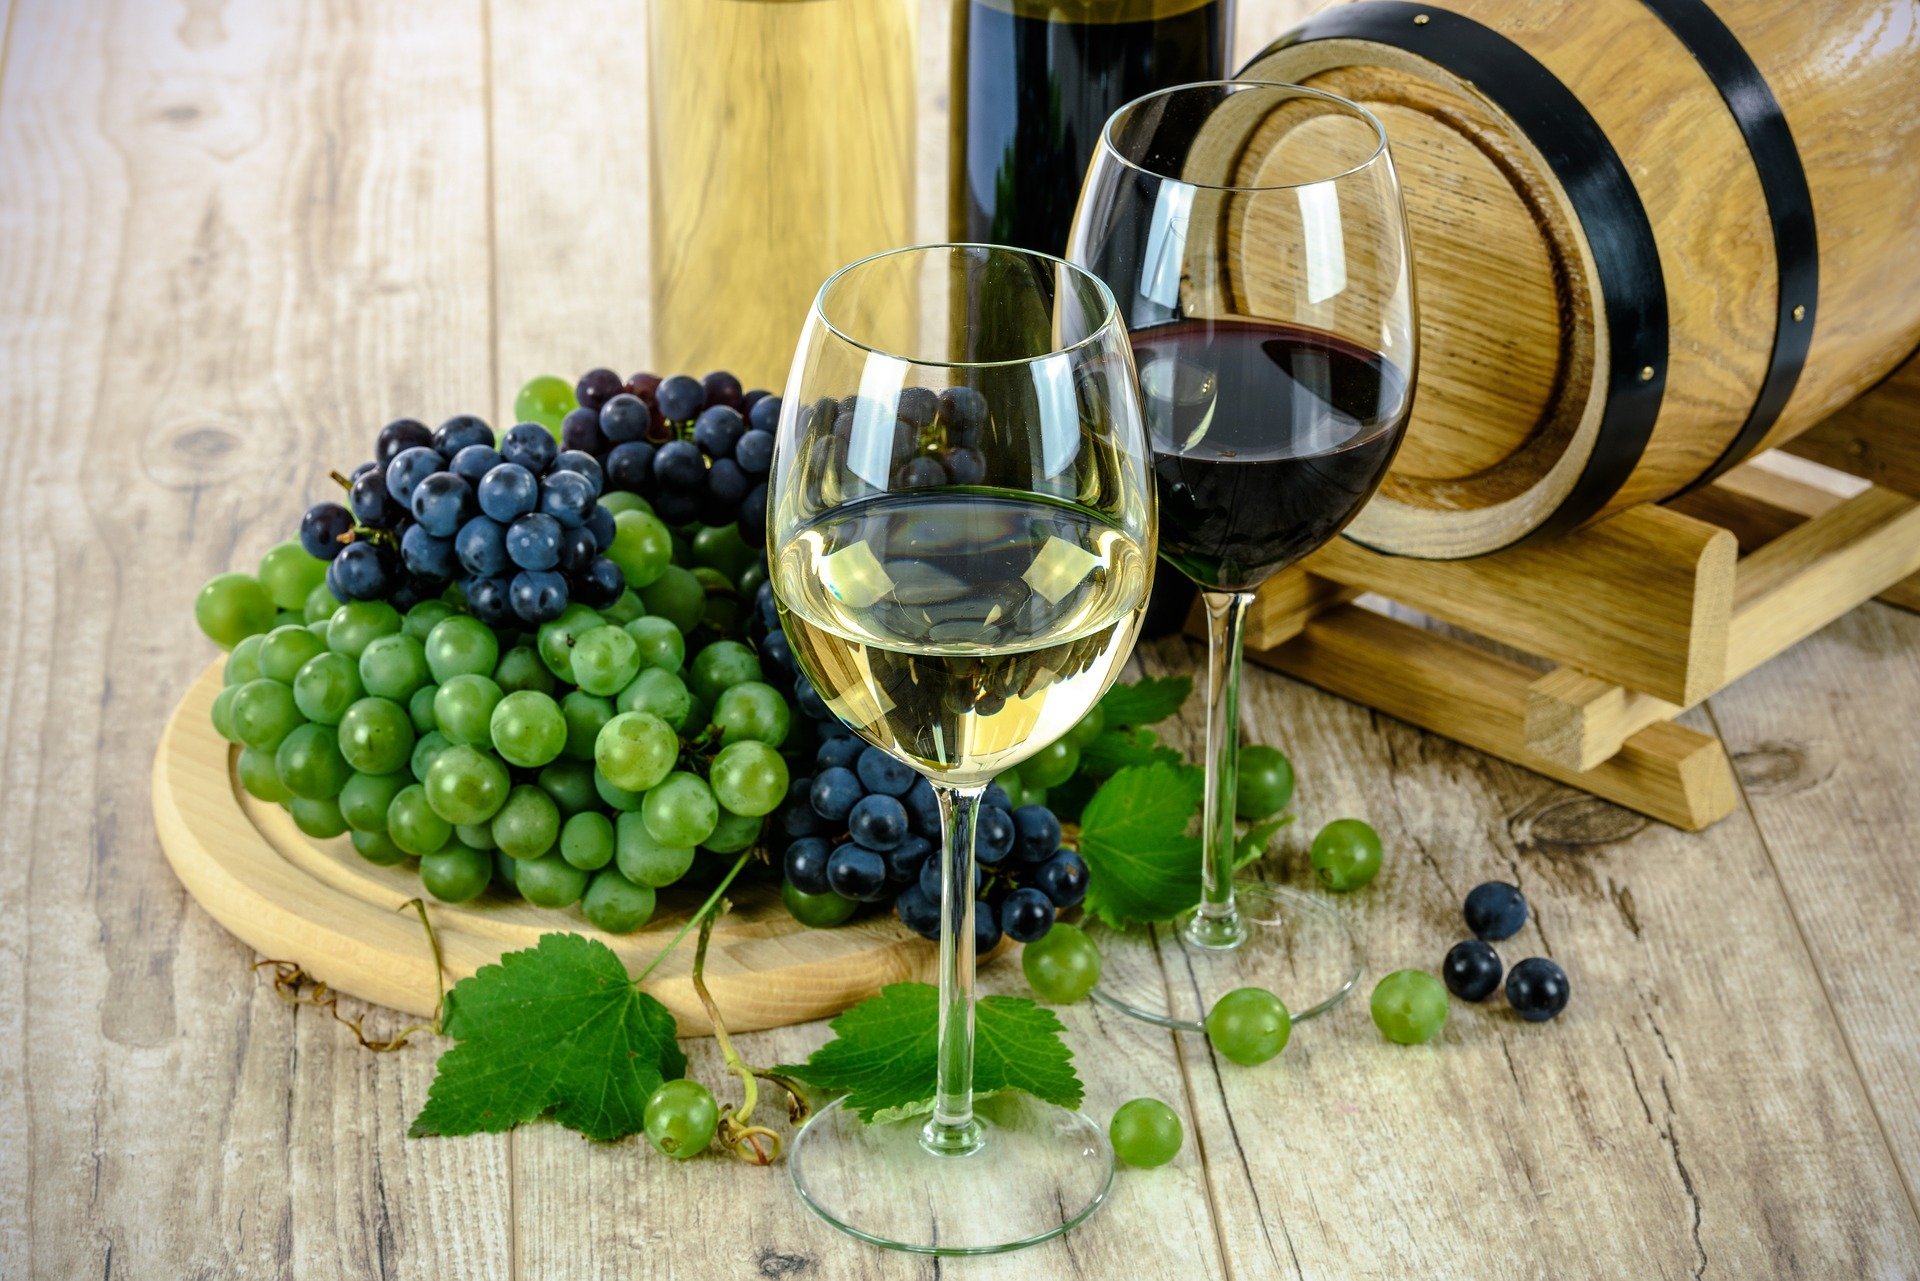 A table decked out with red and white wine, a barrel, and some grapes | Photo: by Pixabay/Photo Mix